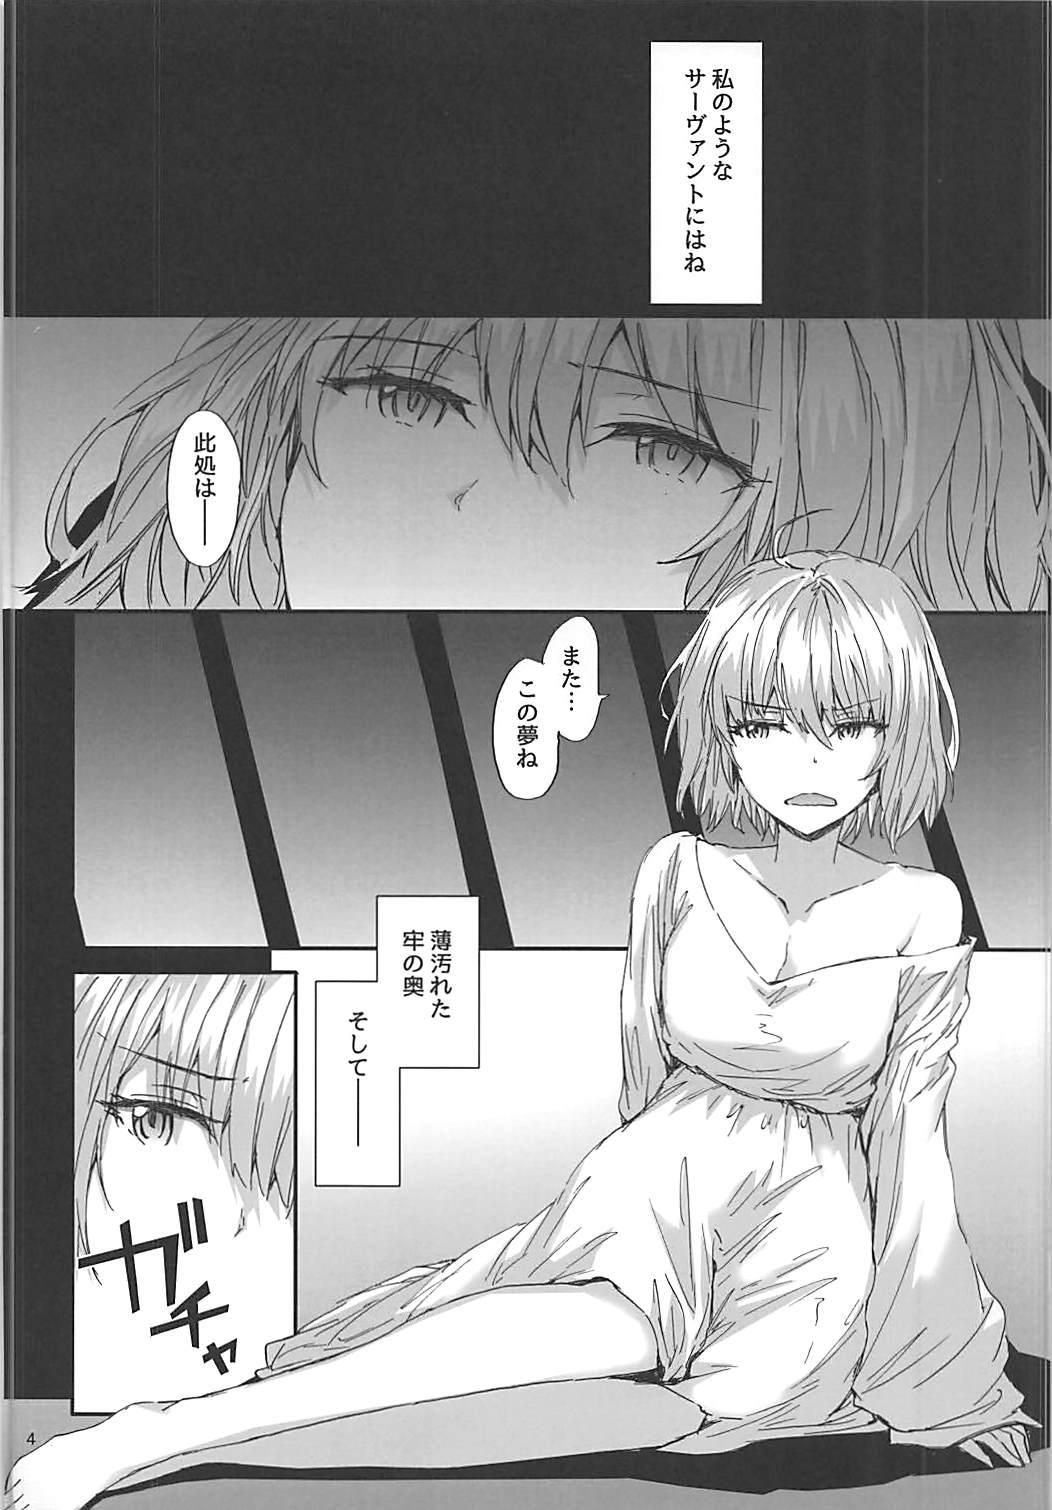 Glasses Ephemeral Daydream - Fate grand order Amatuer - Page 5